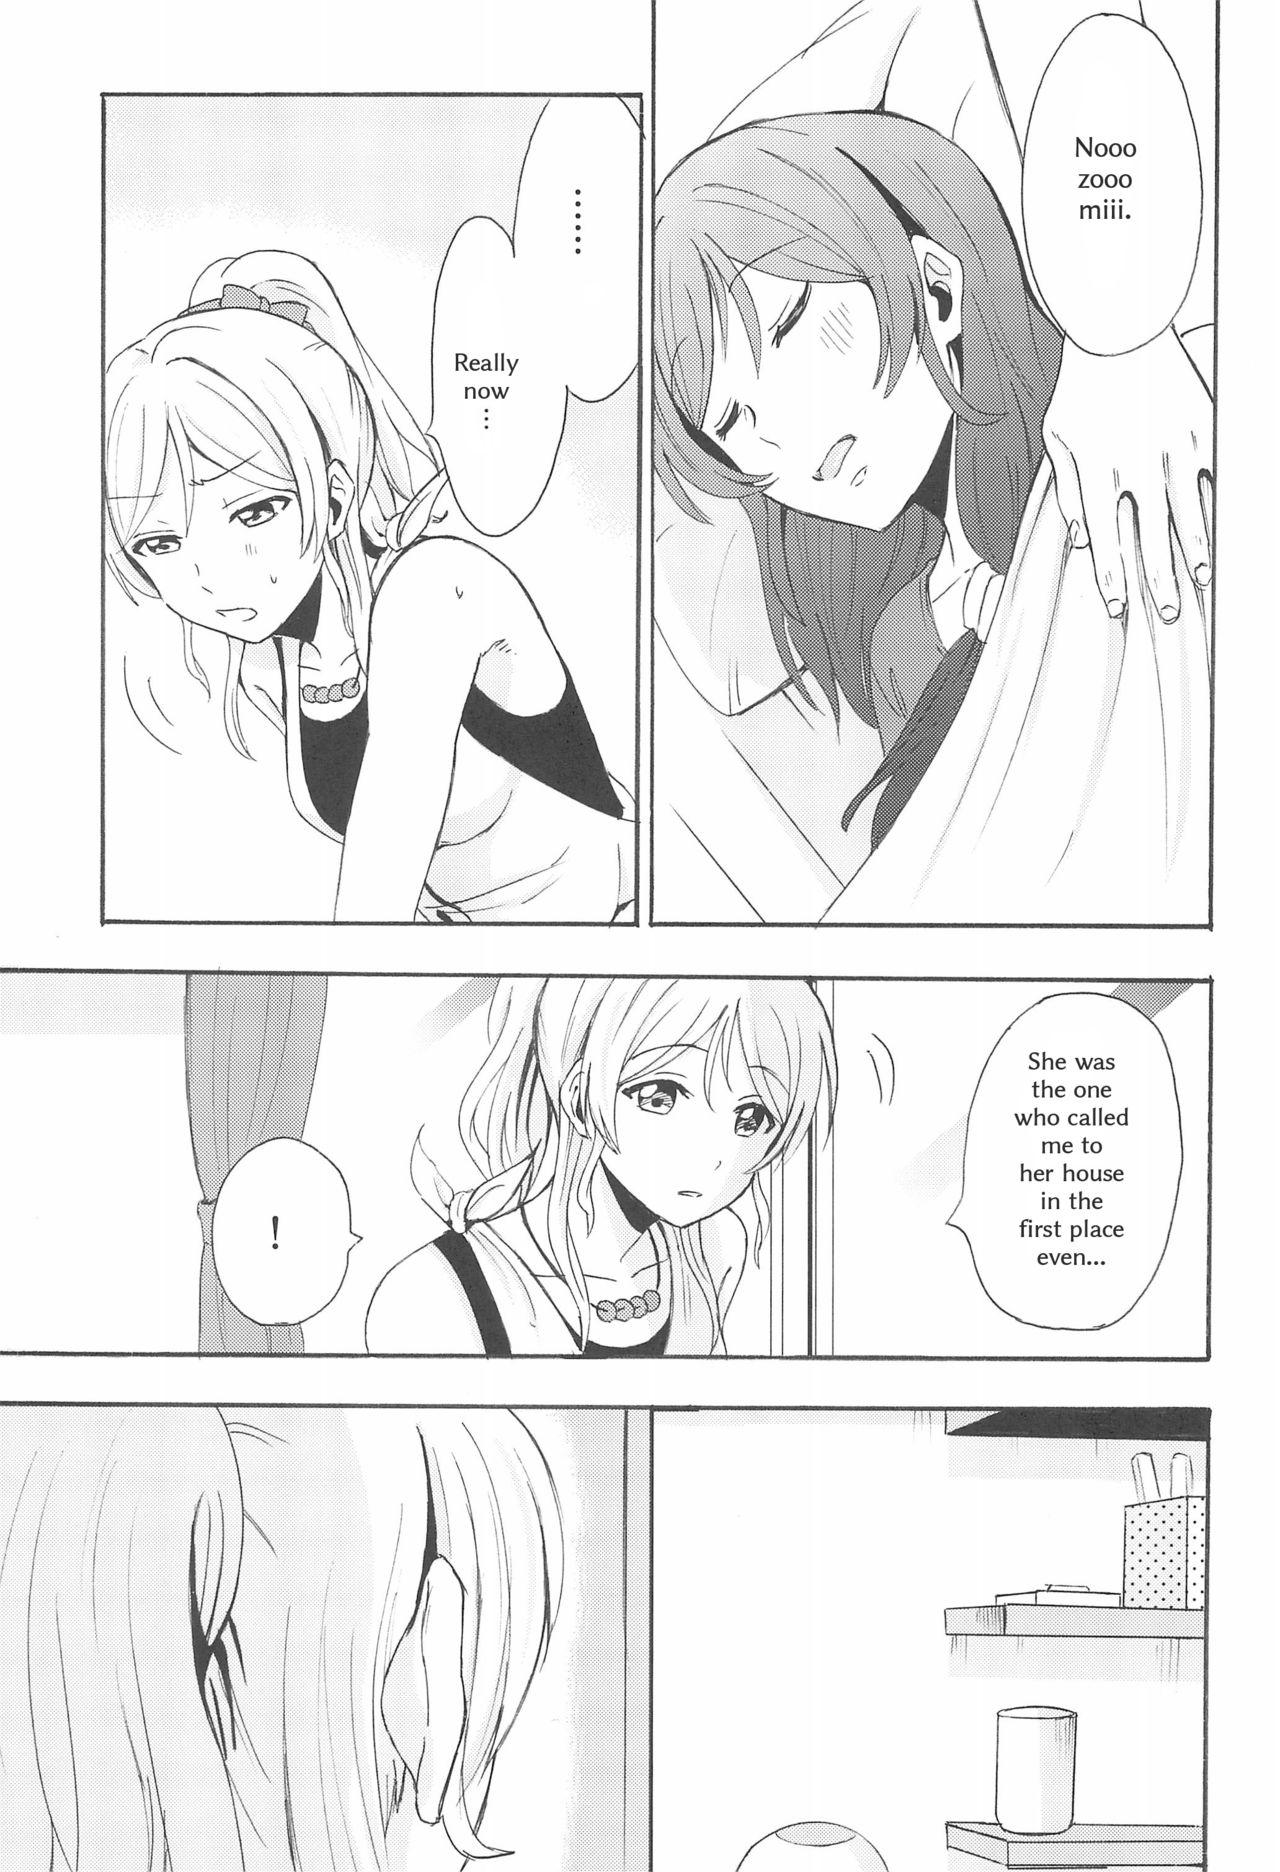 Footfetish LONELINESS - Love live Lesbian Sex - Page 8